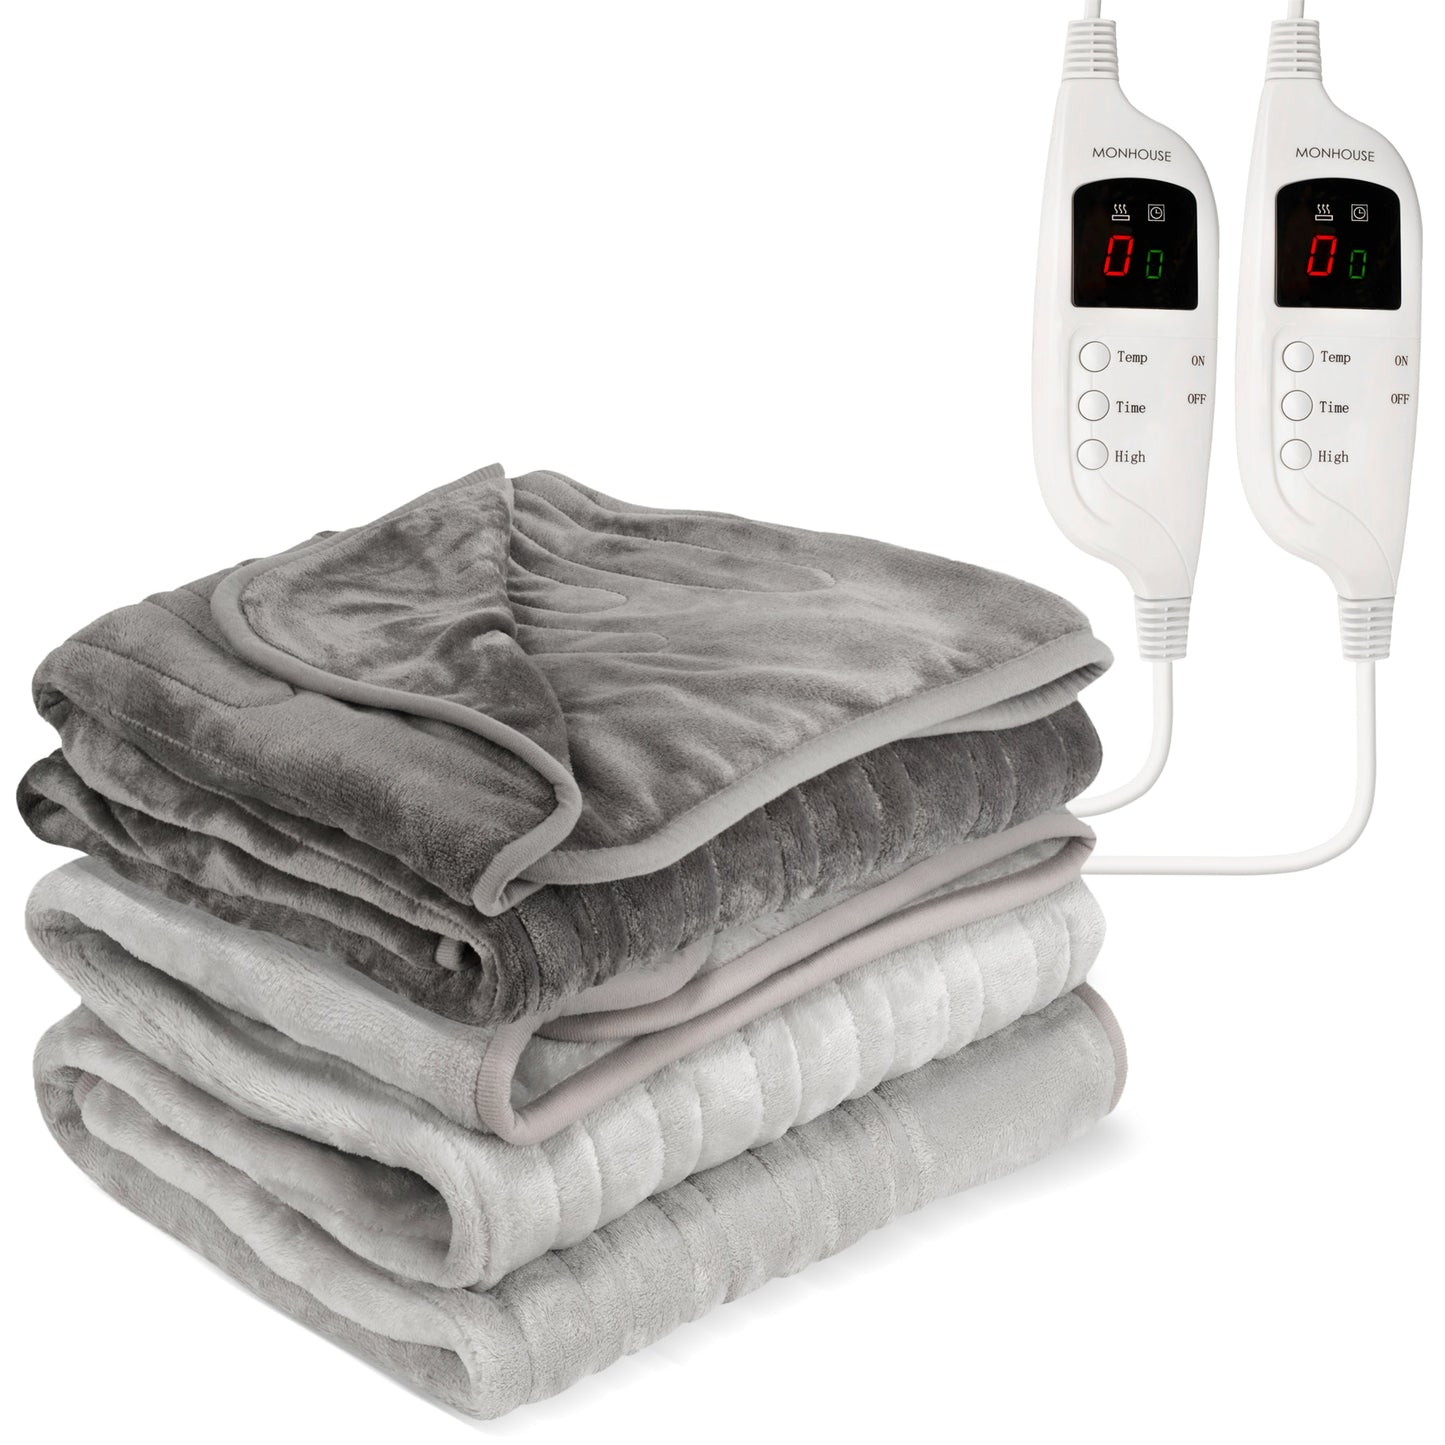 Electric Blanket Heated Throw Digital Controller 9 Hour Timer 9 Heat Settings